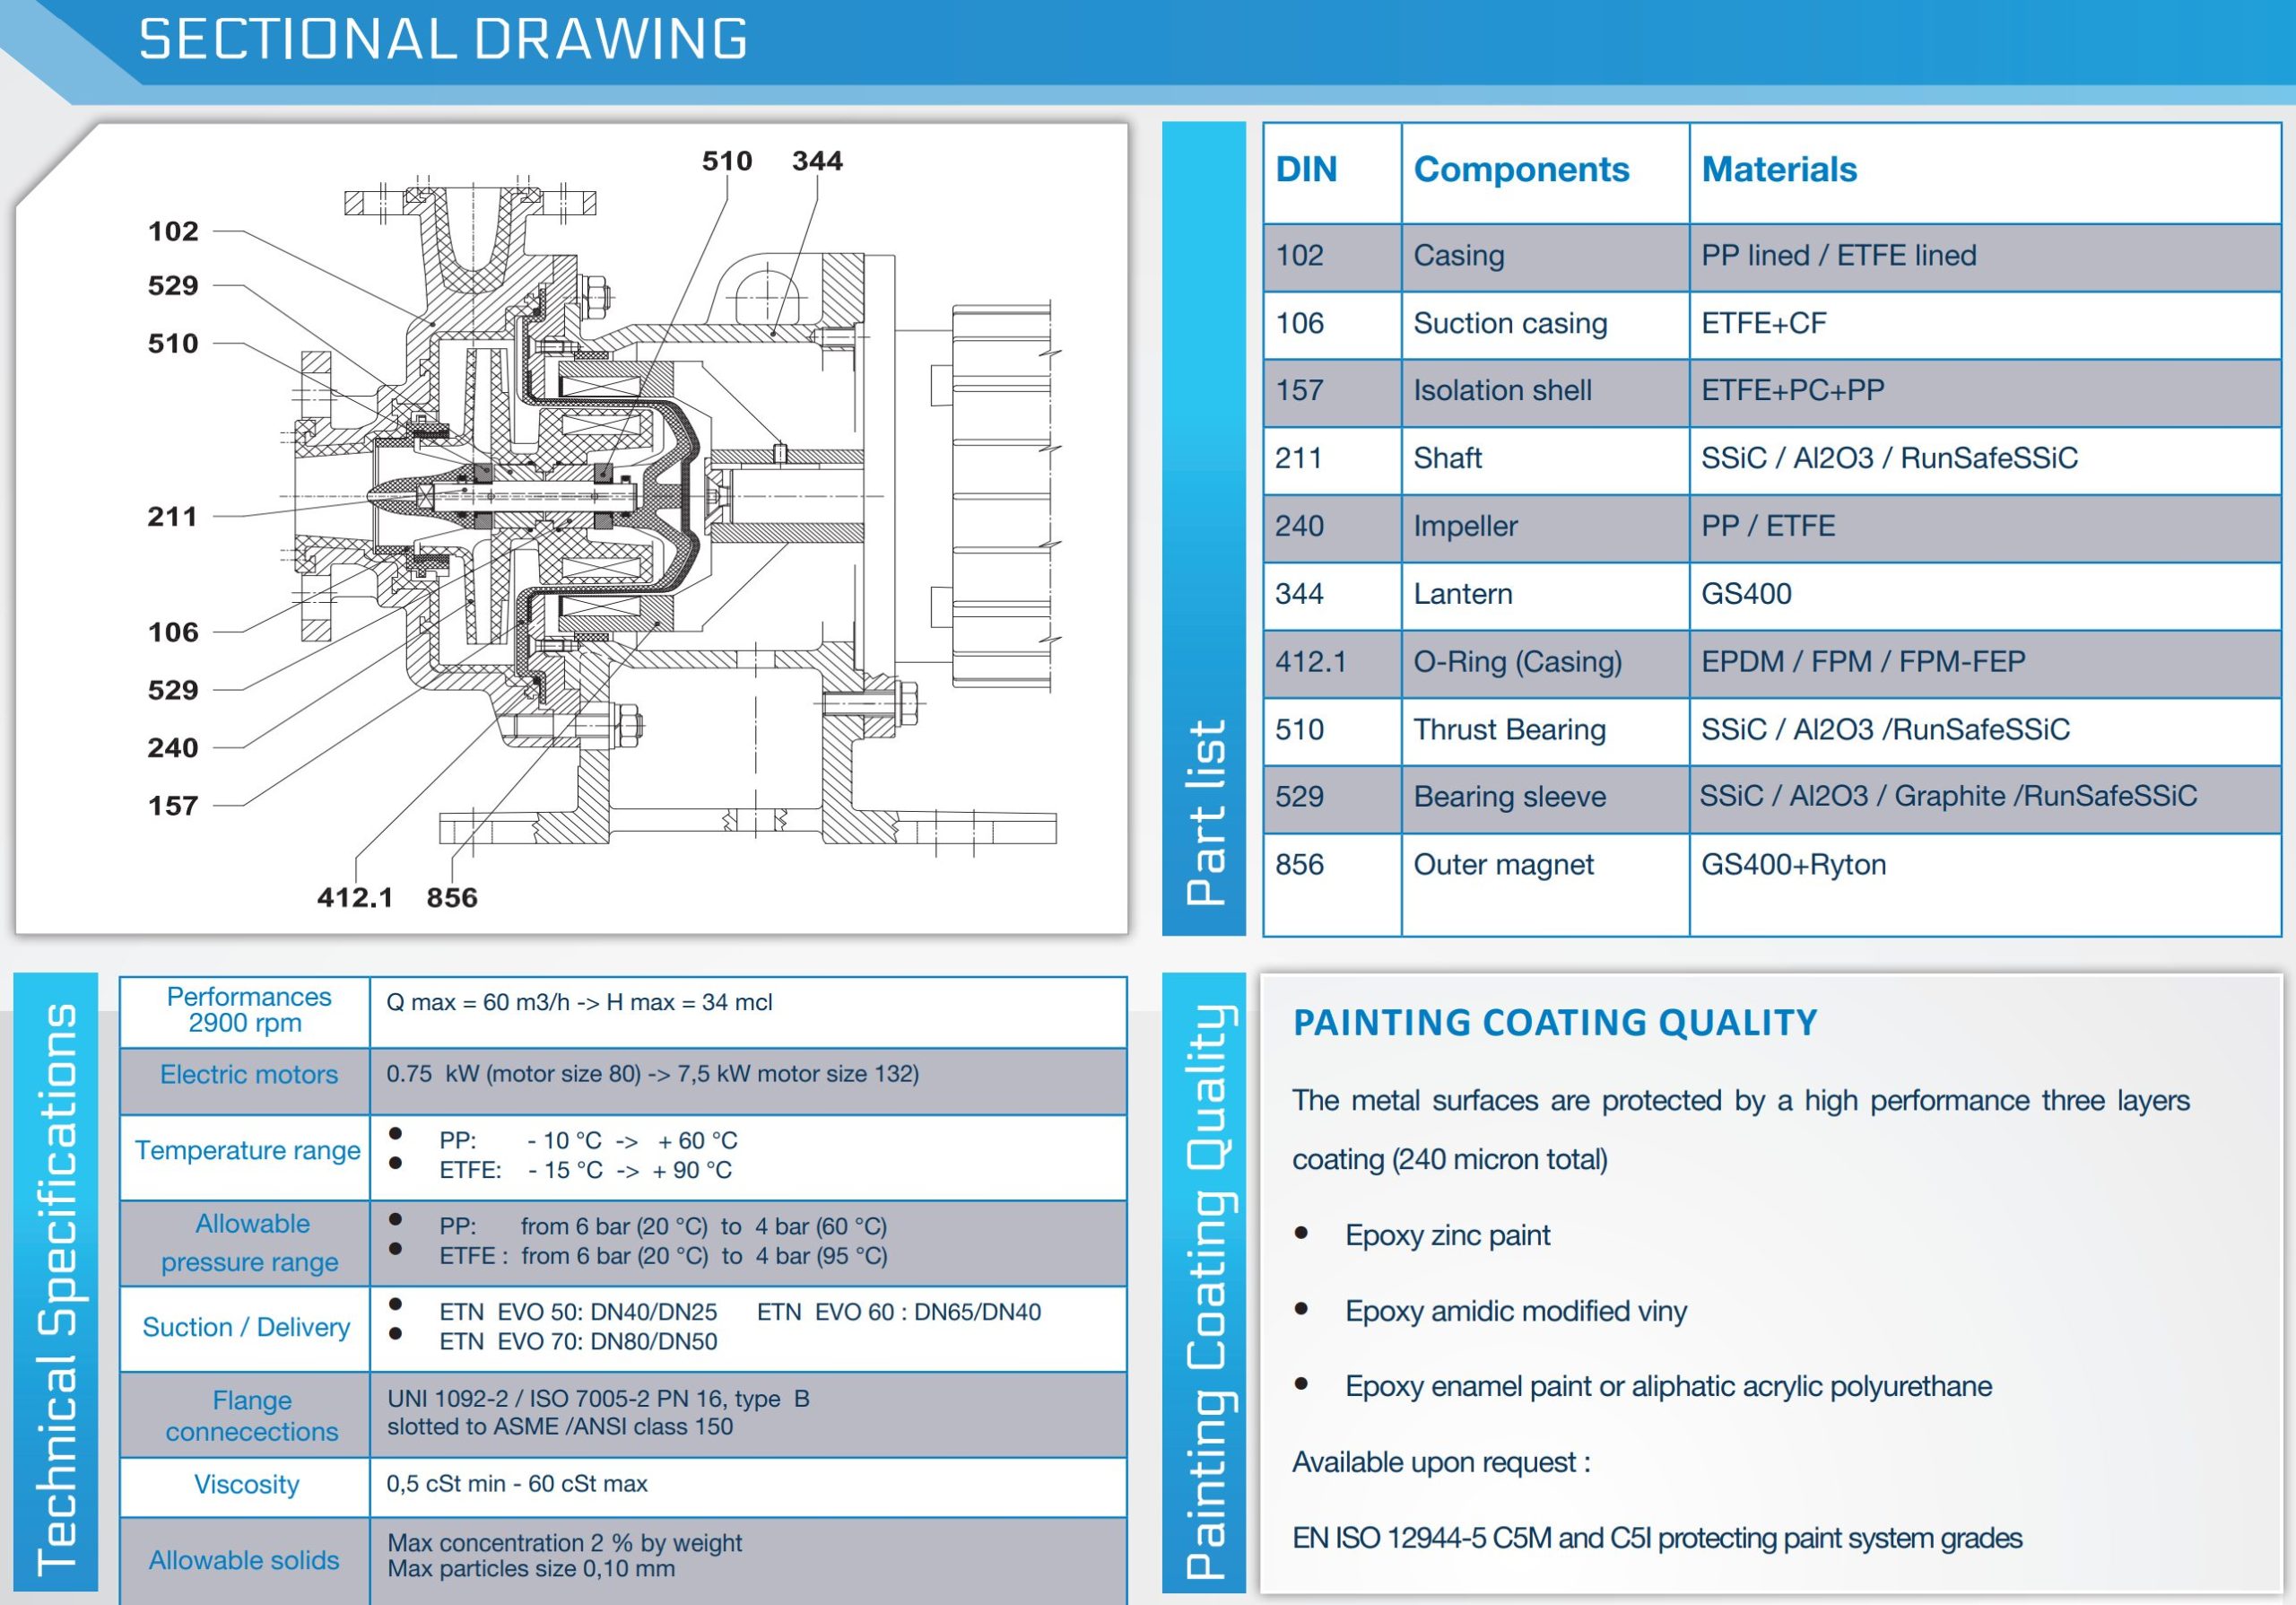 ETN EVO sectional drawing